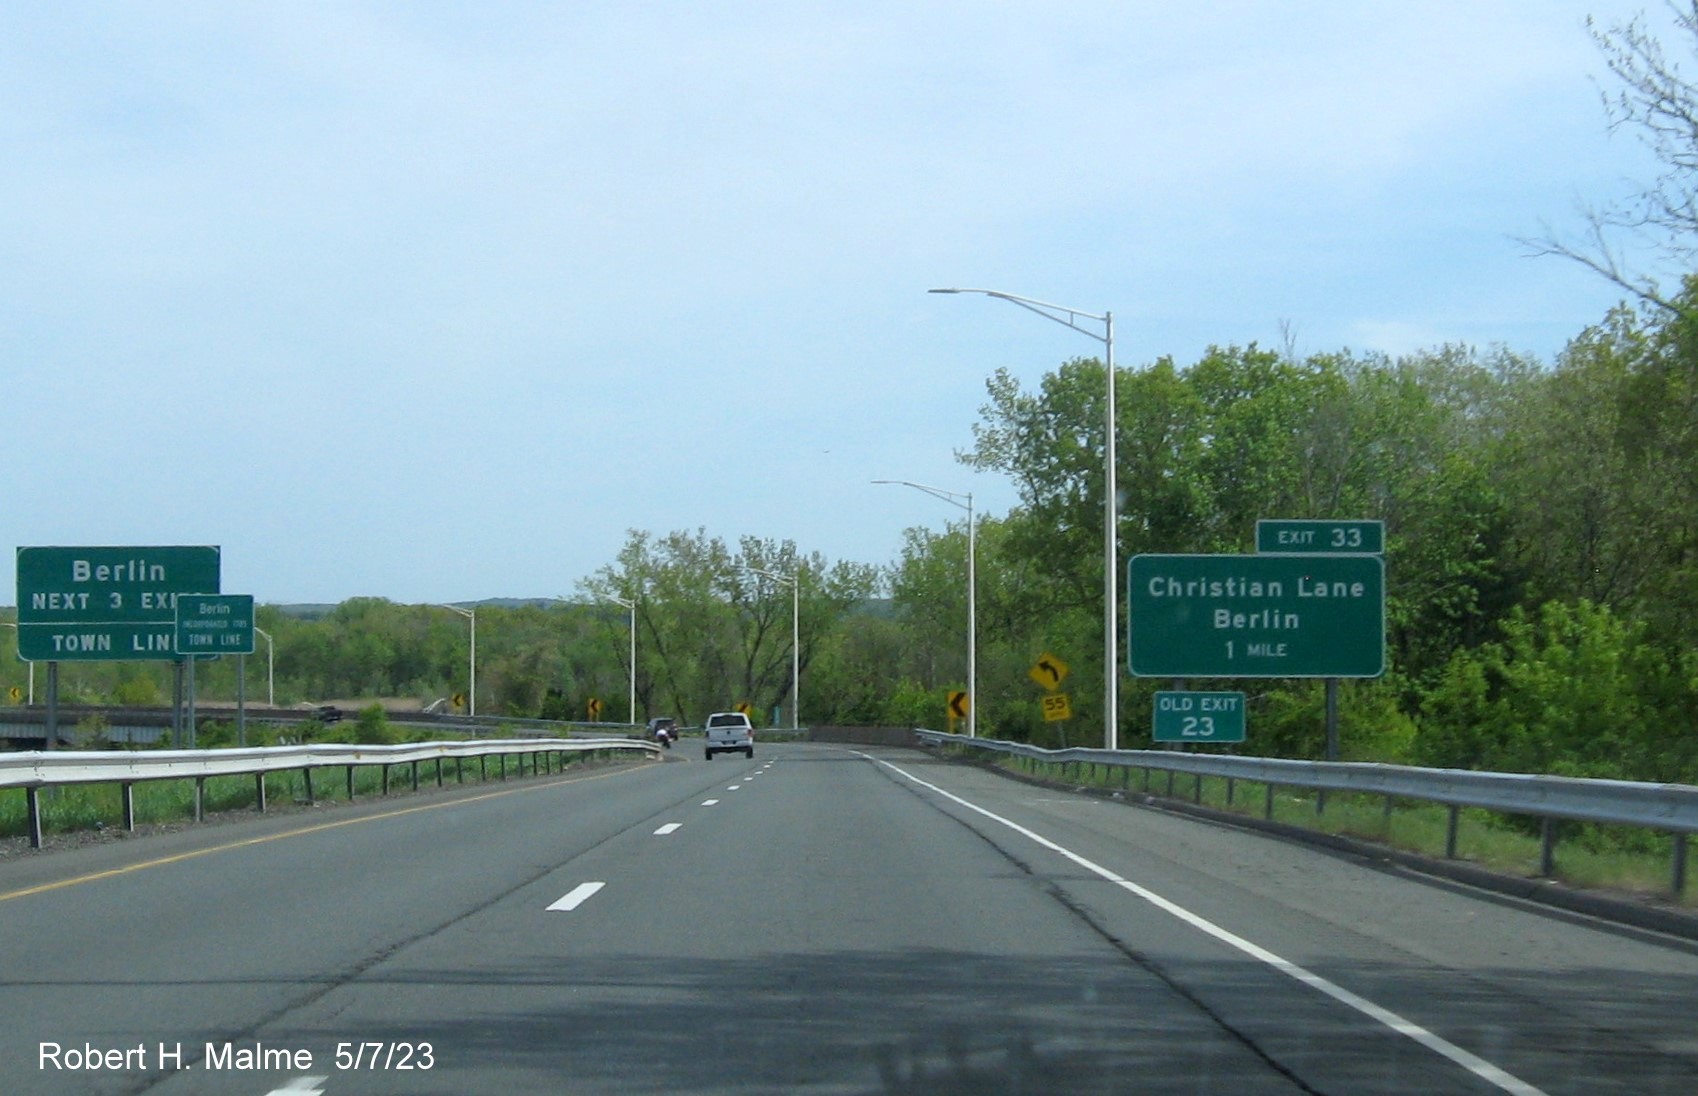 Image of ground mounted 1 Mile advance sign for Christian Lane exit with new milepost based exit number and Old Exit 23 
      sign attached below on CT 9 South in Berlin, May 2023